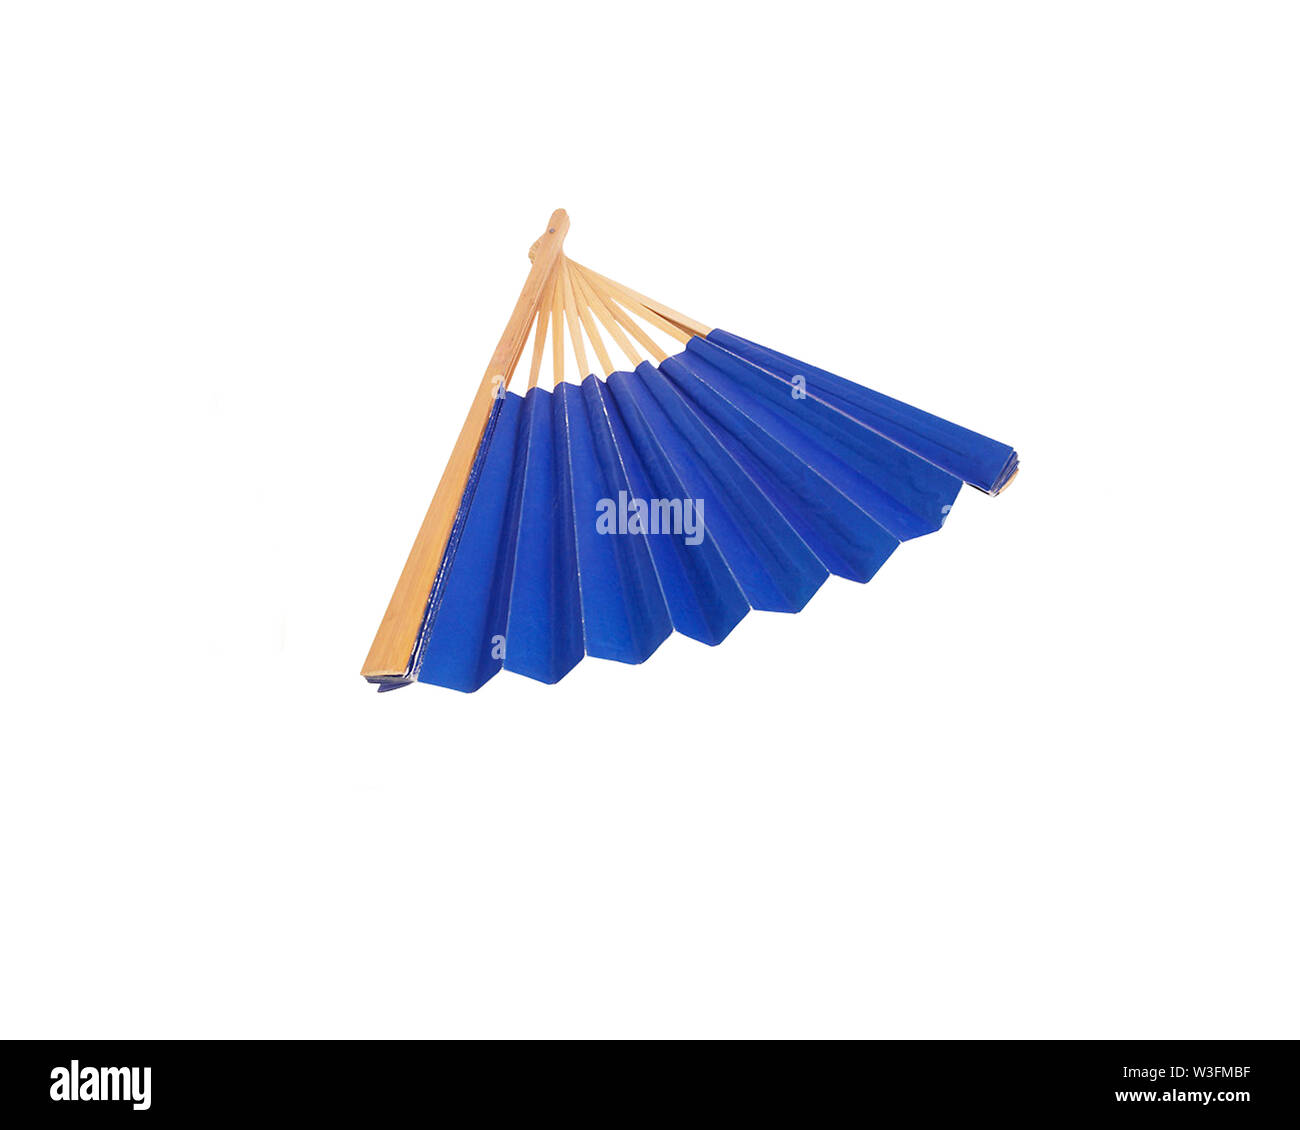 Blue Open Hand Fan Isolated on a White Background. Stock Photo